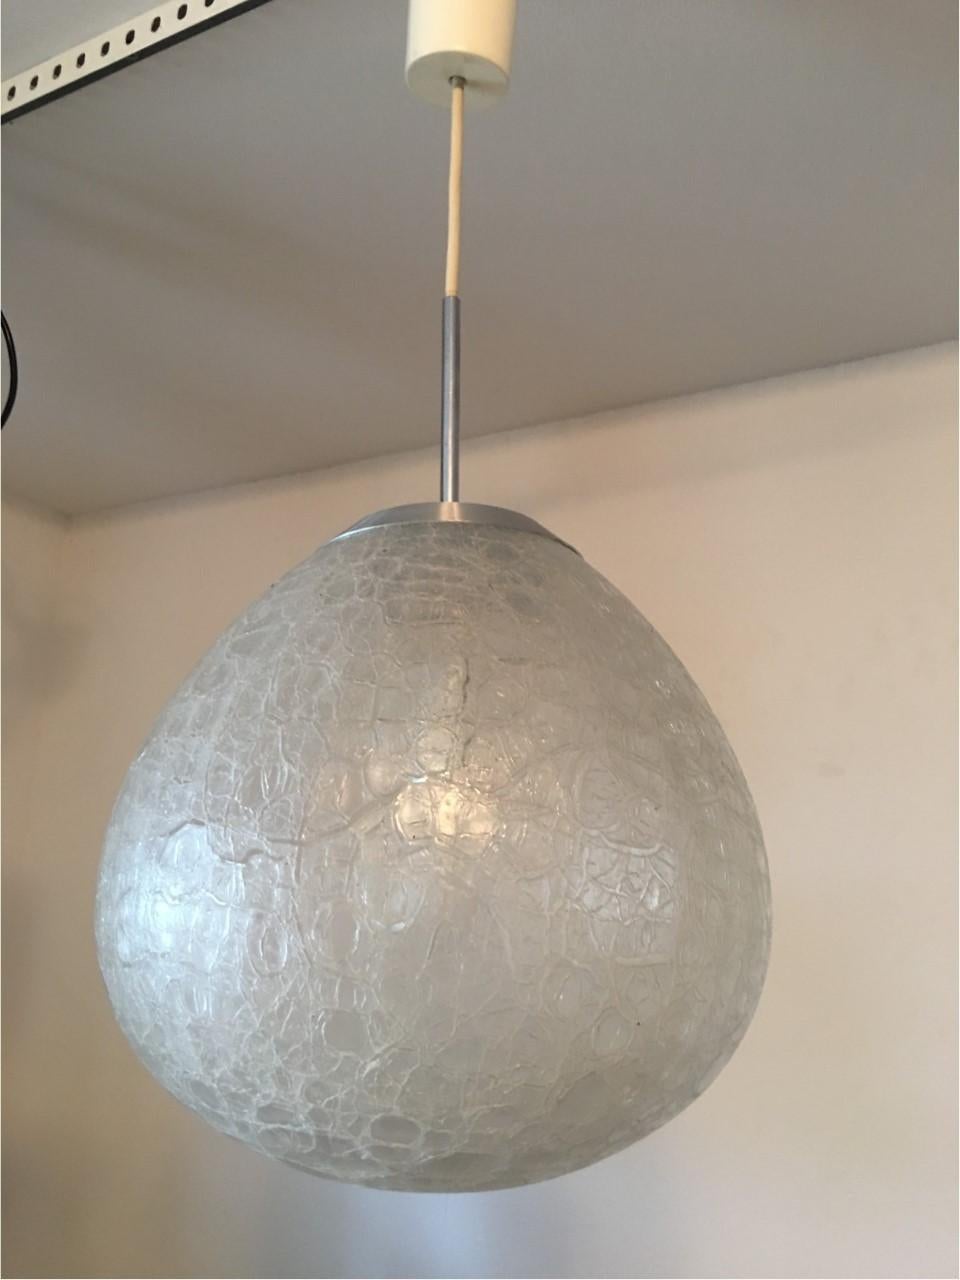 Mid-20th Century Crackle Glass Drop Shaped Pendant Lamp by Doria from the 1960s For Sale